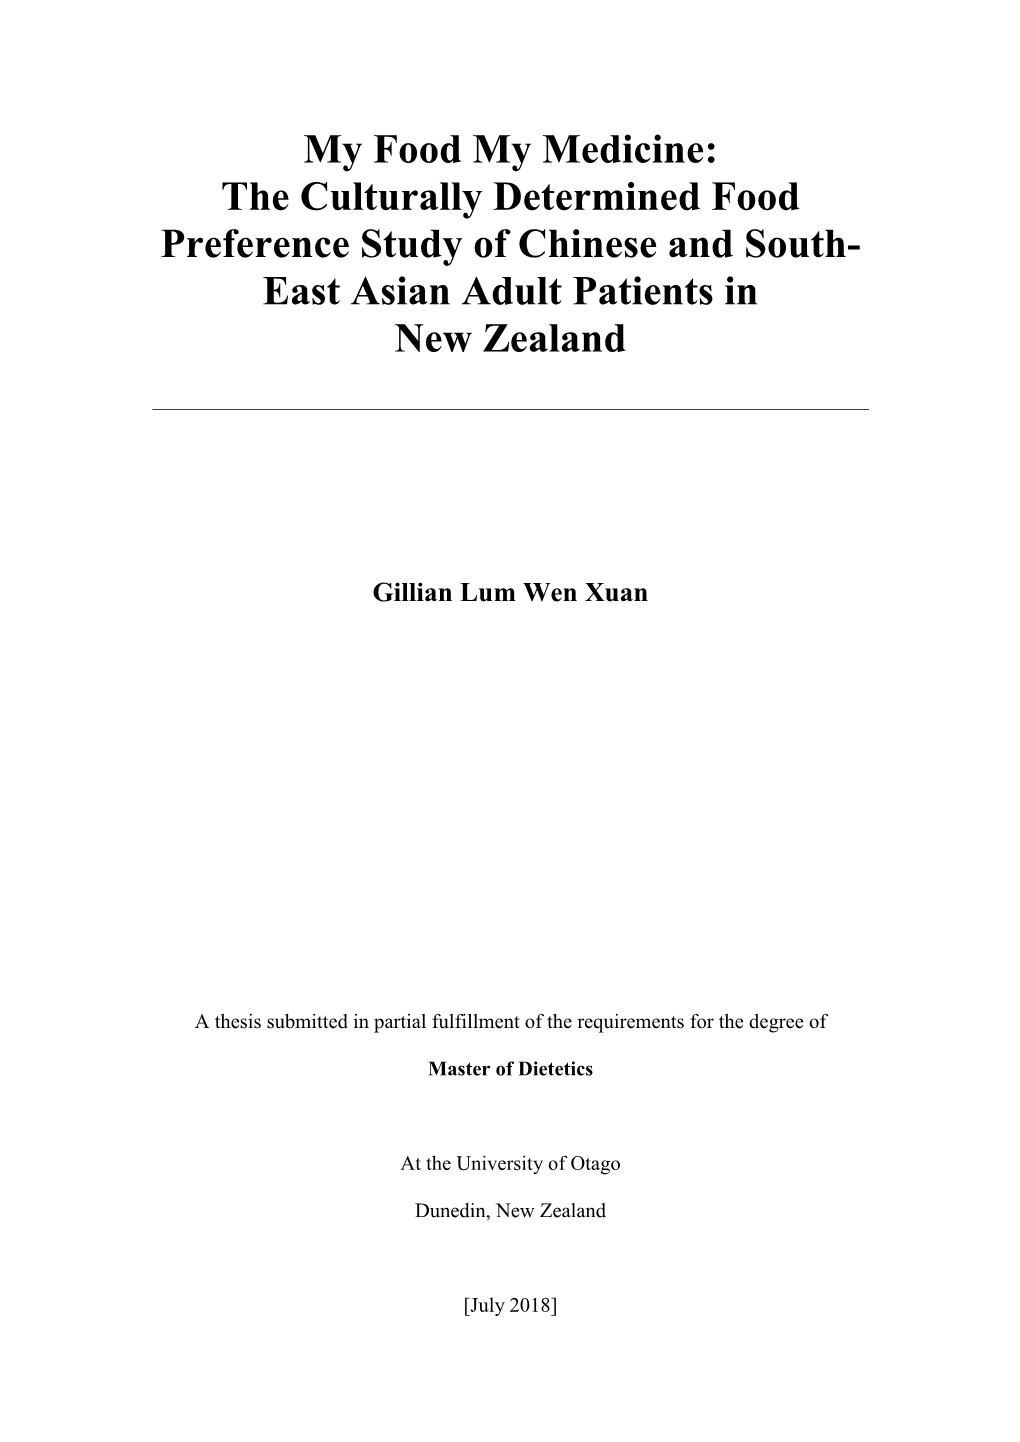 My Food My Medicine: the Culturally Determined Food Preference Study of Chinese and South- East Asian Adult Patients in New Zealand